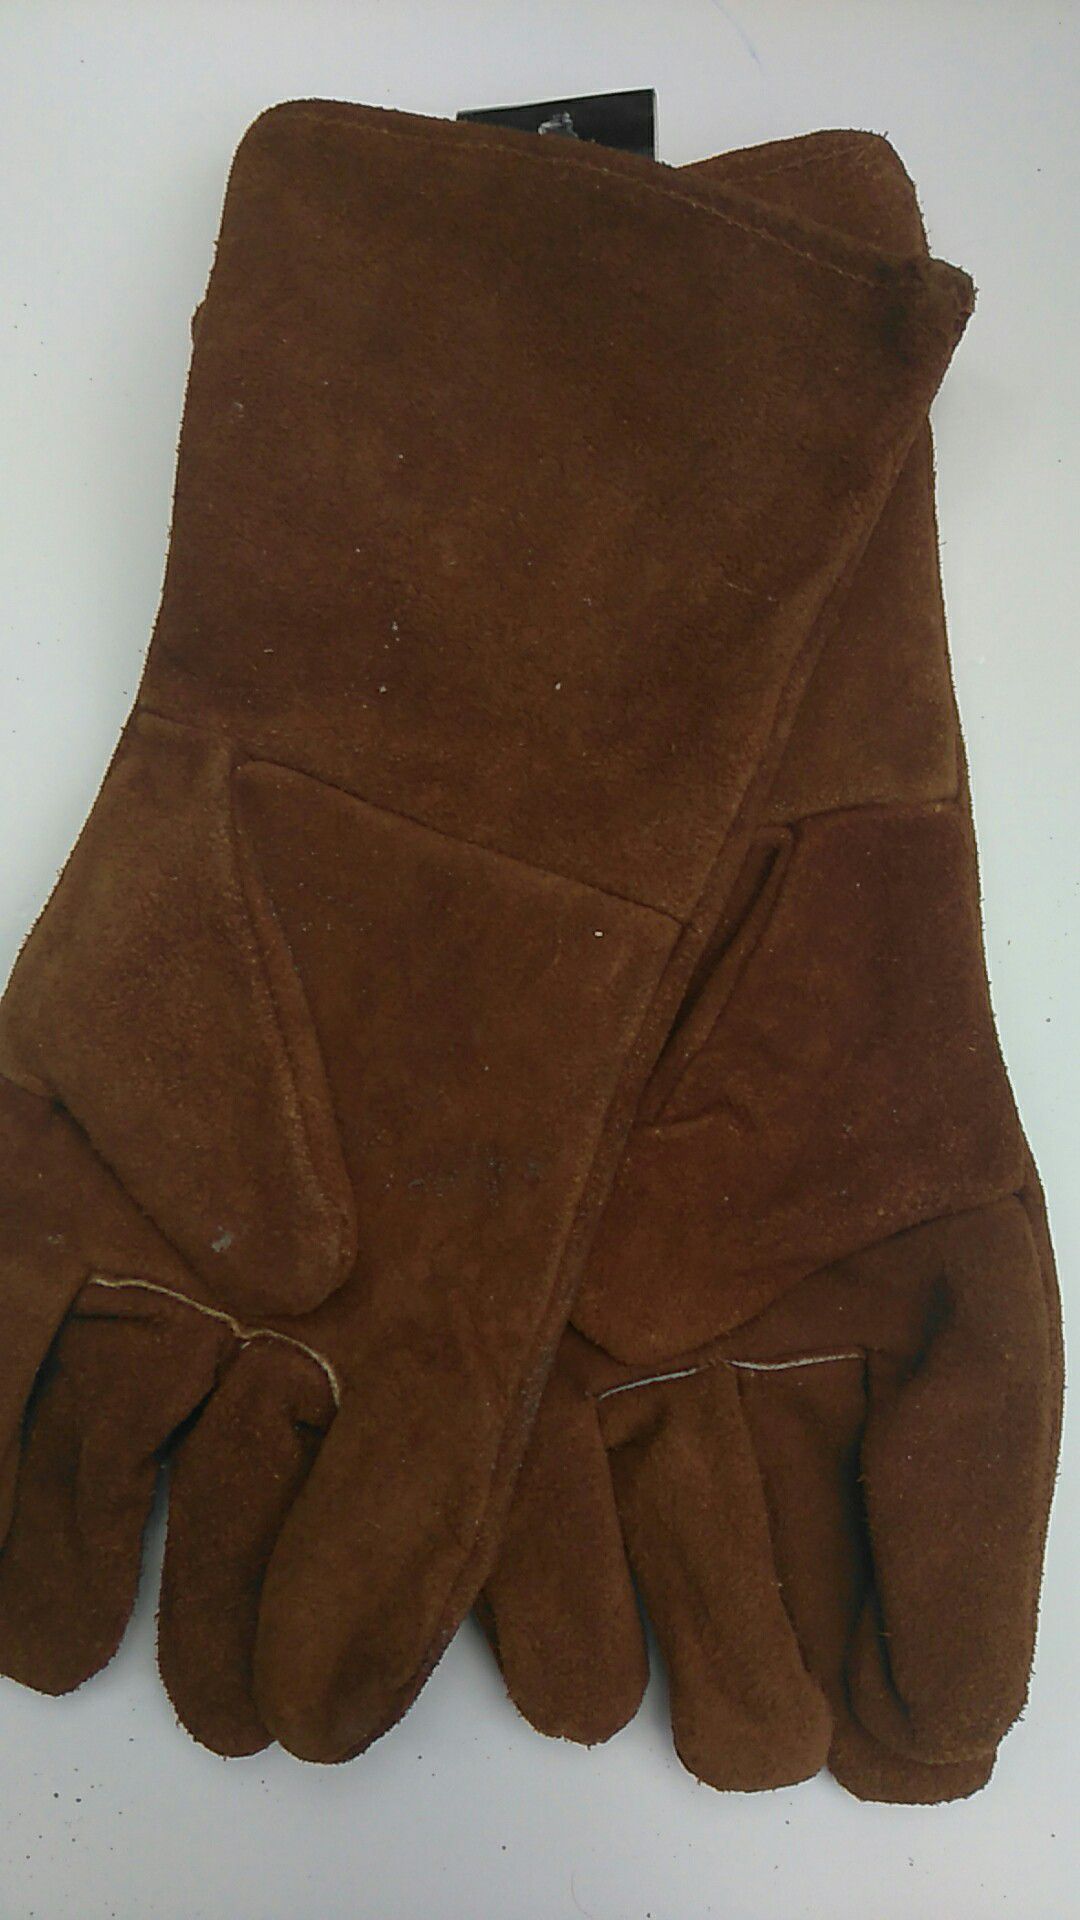 NEW! LEATHER WELDING GLOVES, 14 INCH COWHIDE